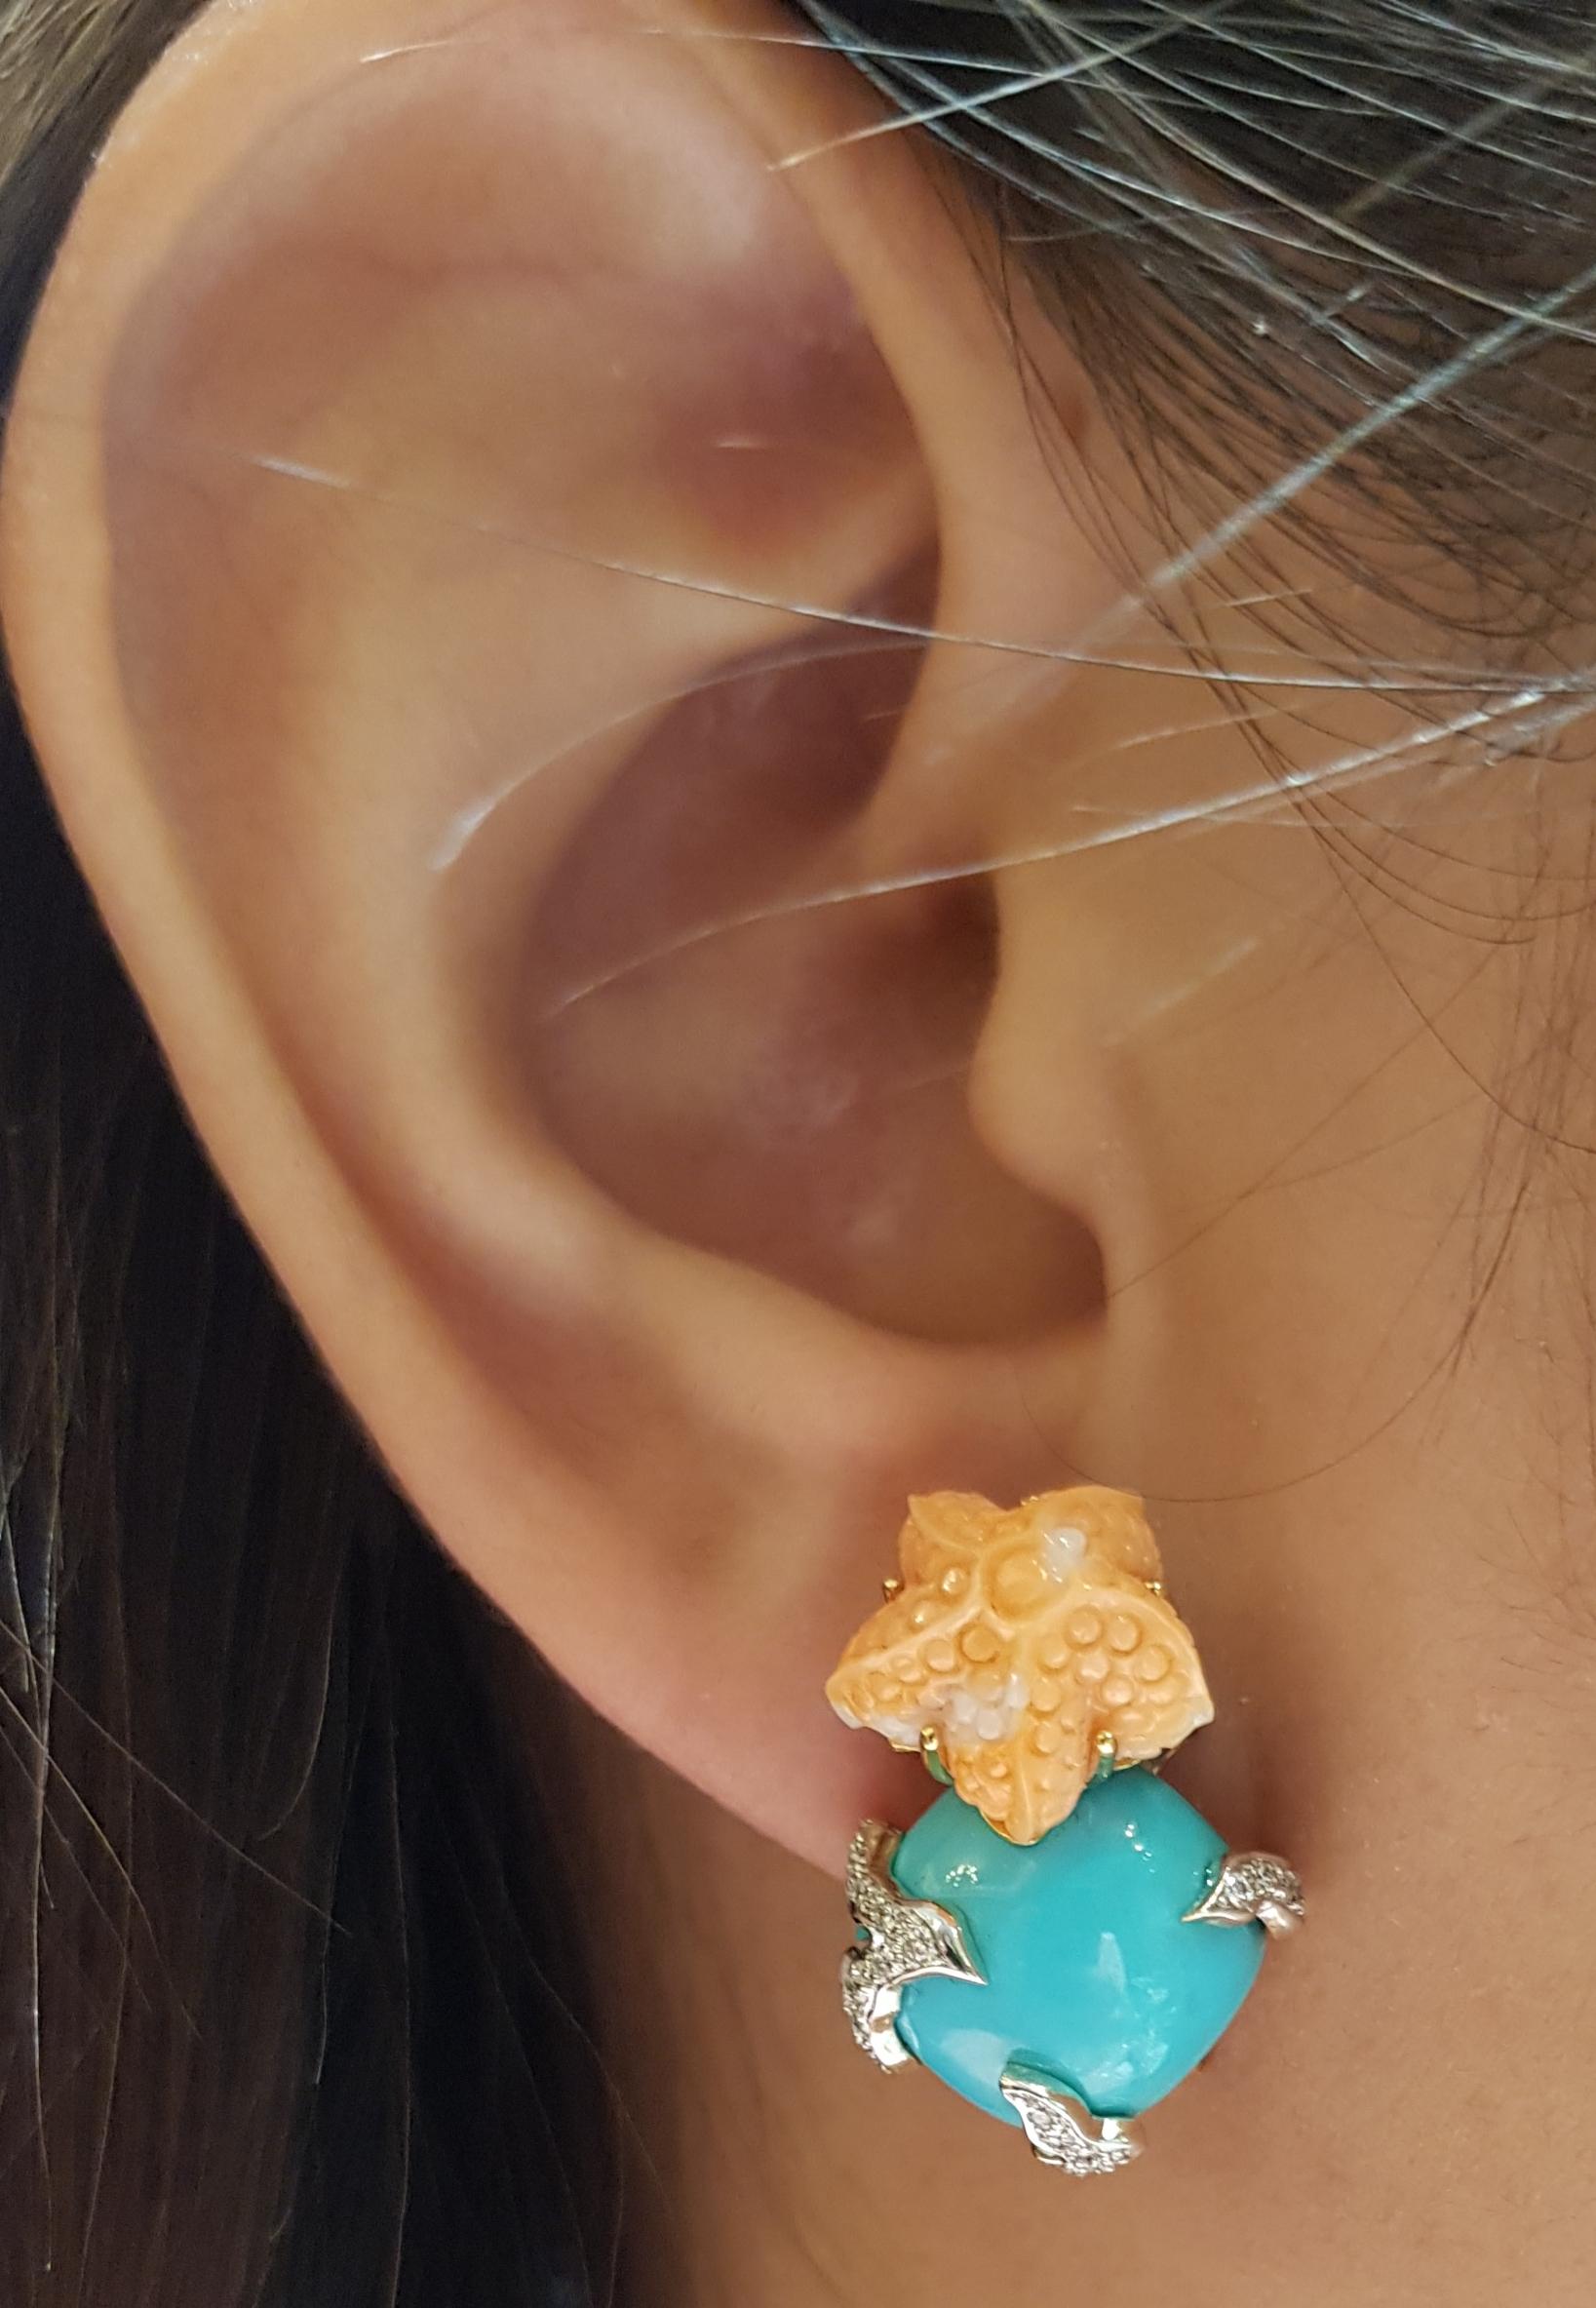 Turquoise, Coral with Diamond 0.2 carat Earrings set in 18 Karat Gold Settings

Width:  1.5 cm 
Length:  2.5 cm
Total Weight: 13.01 grams

